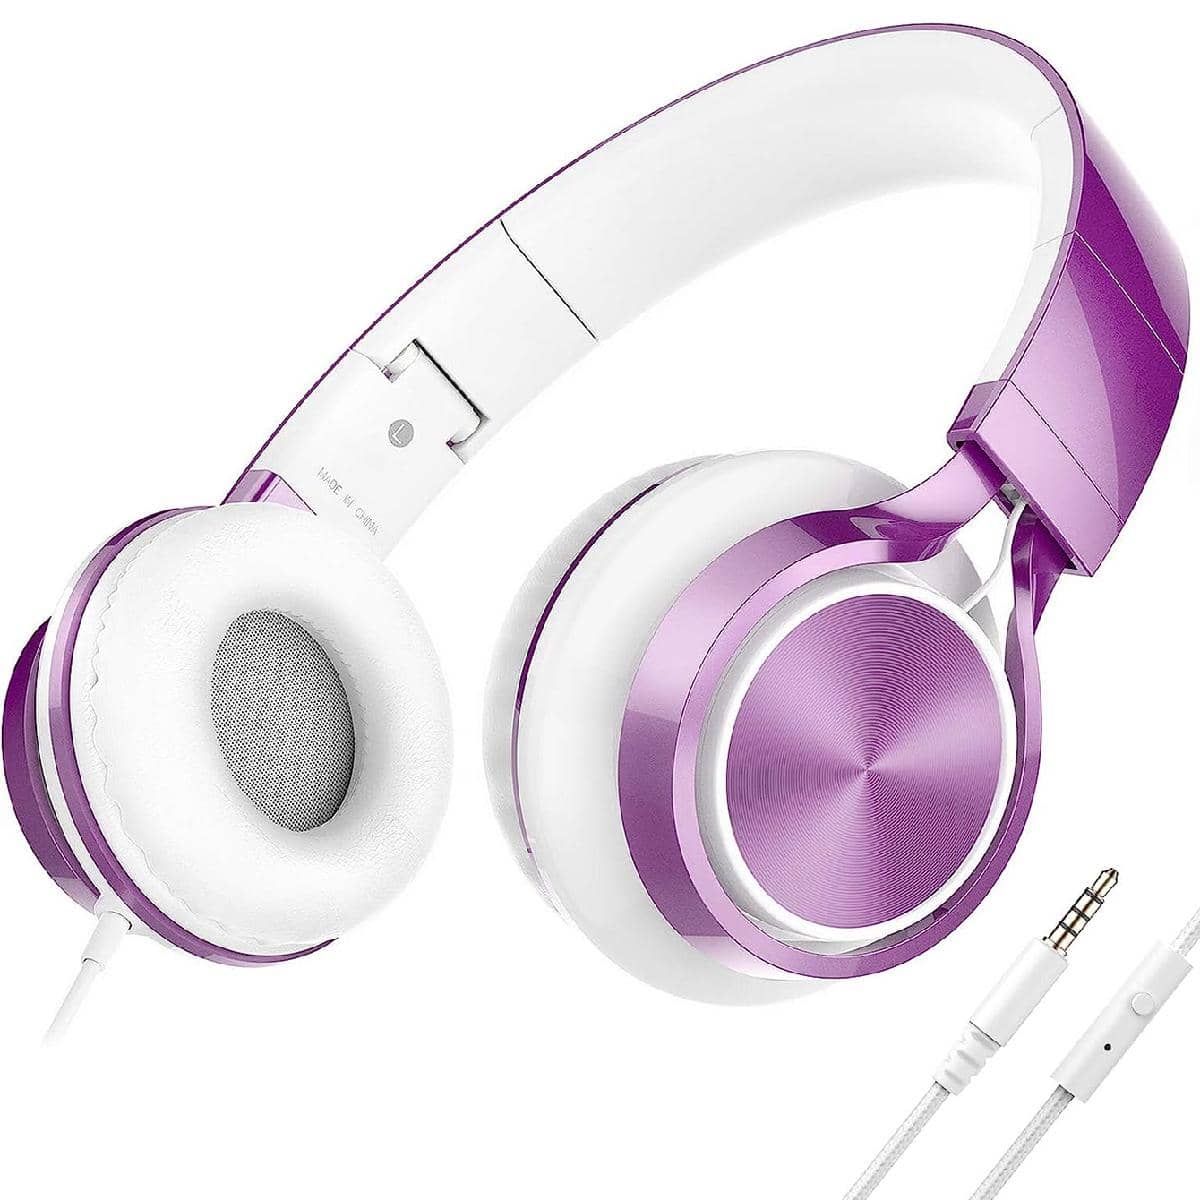 SHEIN 1pc Wired Headphones with Microphone for Chromebook Laptop Computer Smartphone, 3.5mm Foldable Lightweight Headset Violet Purple one-size